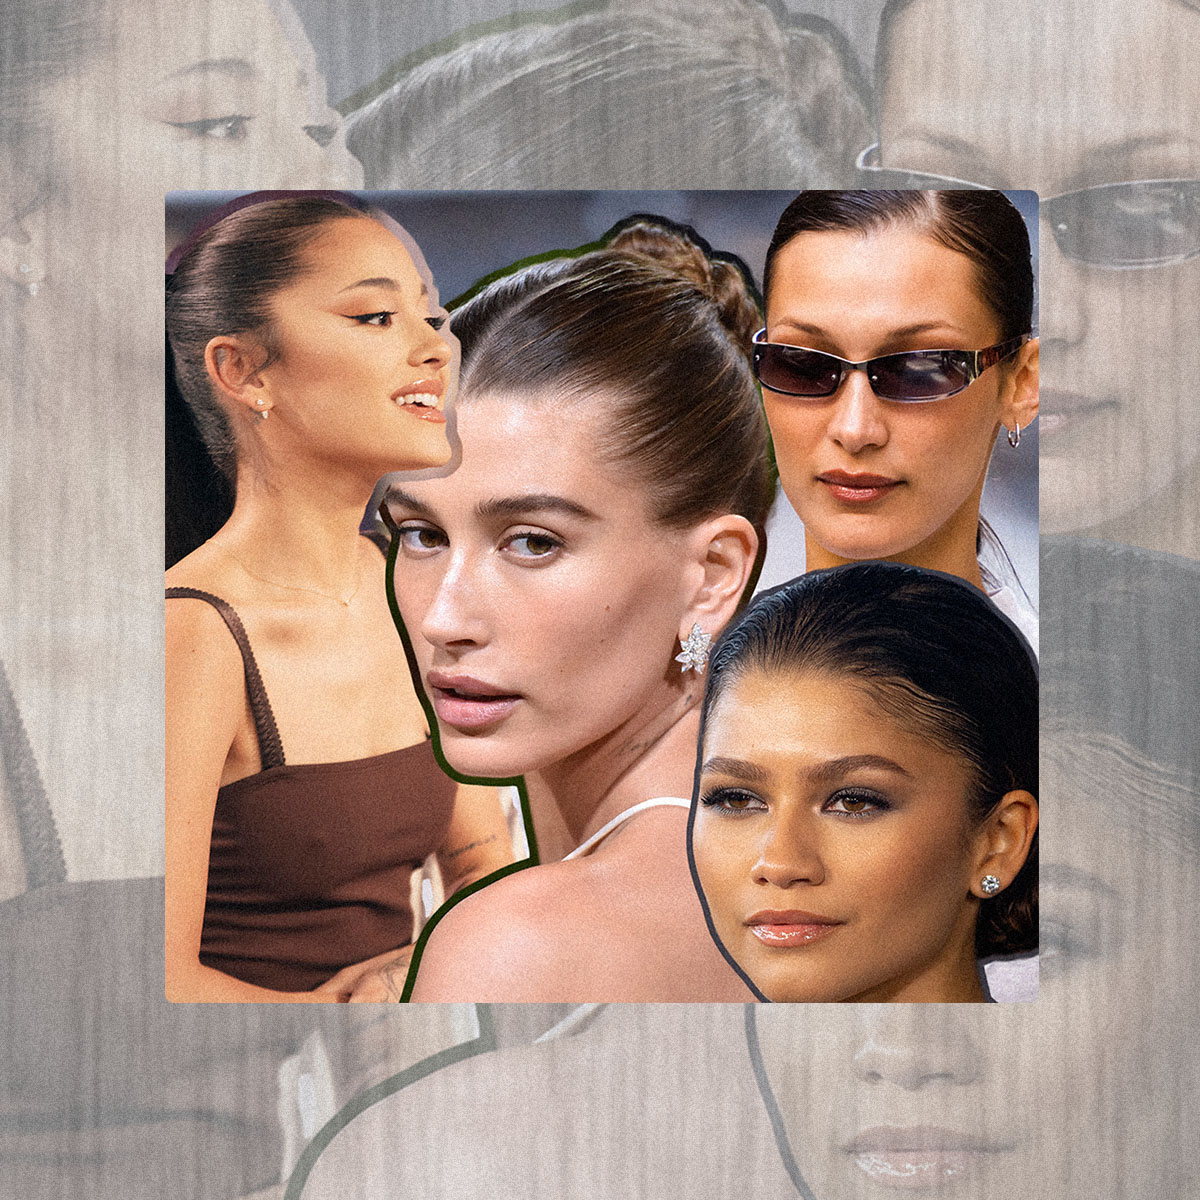 15 Products for the Slicked-Back Hair Trend